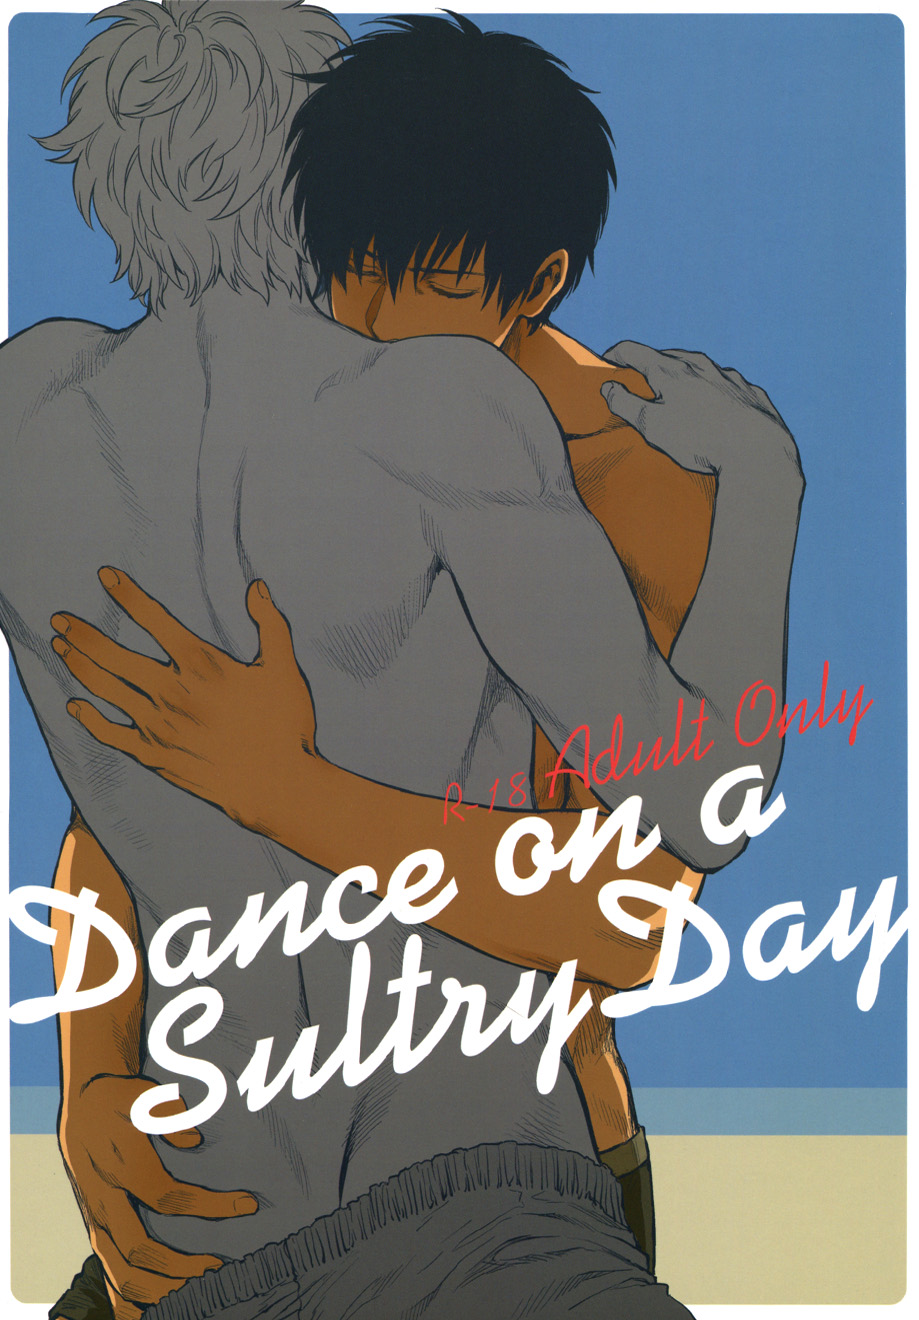 [3745HOUSE (Mikami Takeru)] Dance on a SultryDay (Gintama) [3745HOUSE (ミカミタケル)] Dance on a SultryDay (銀魂)